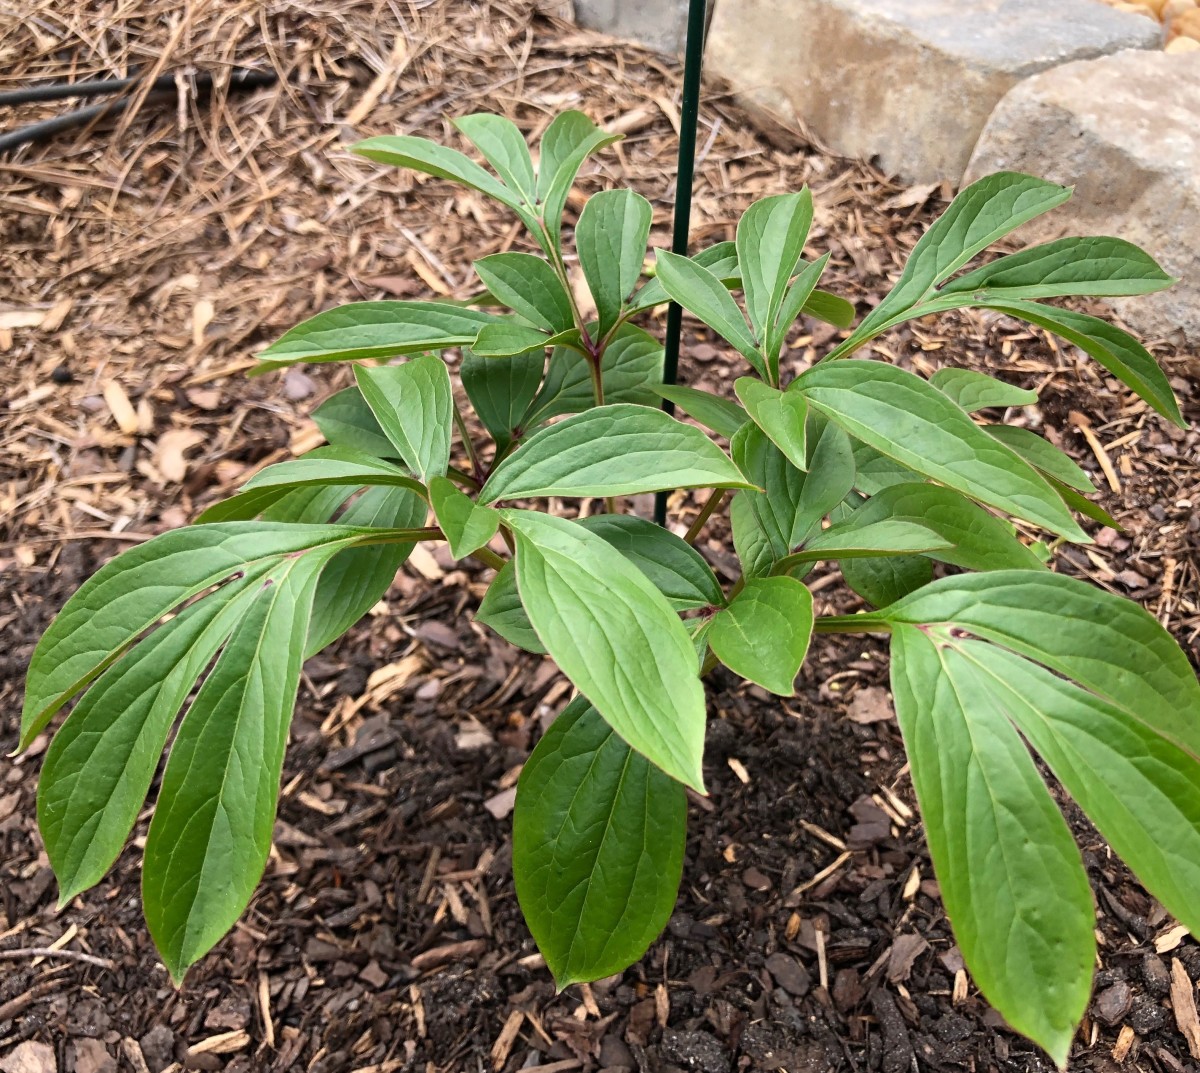 This peony emerged from the ground about a week before this photo was taken on May 4, 2021. It never bloomed, and soon died. Soon after that, I learned it is just too hot here for peonies to thrive.